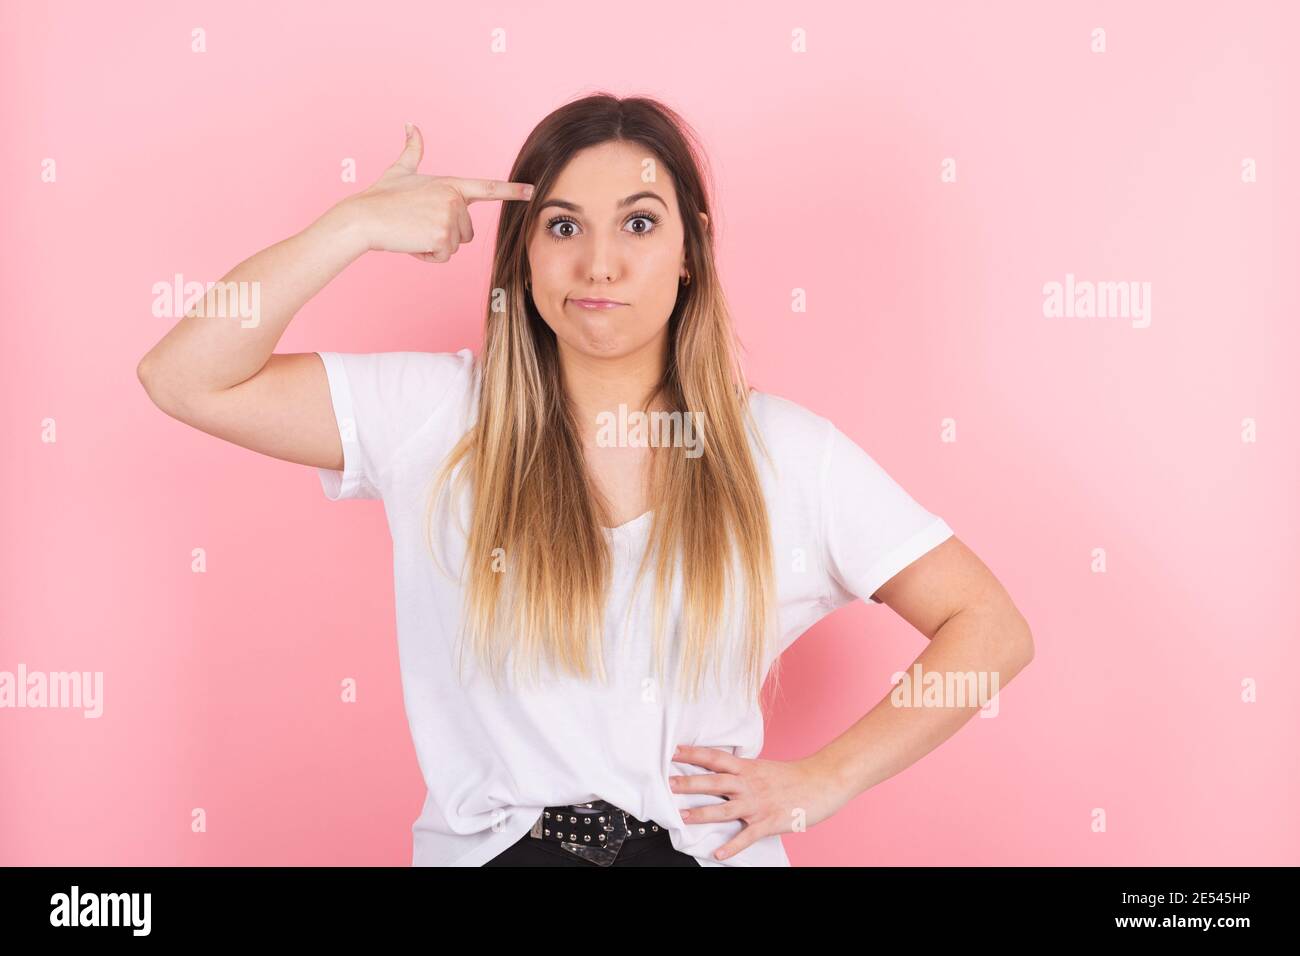 woman looking unhappy and stressed, suicide gesture making gun sign with hand Stock Photo